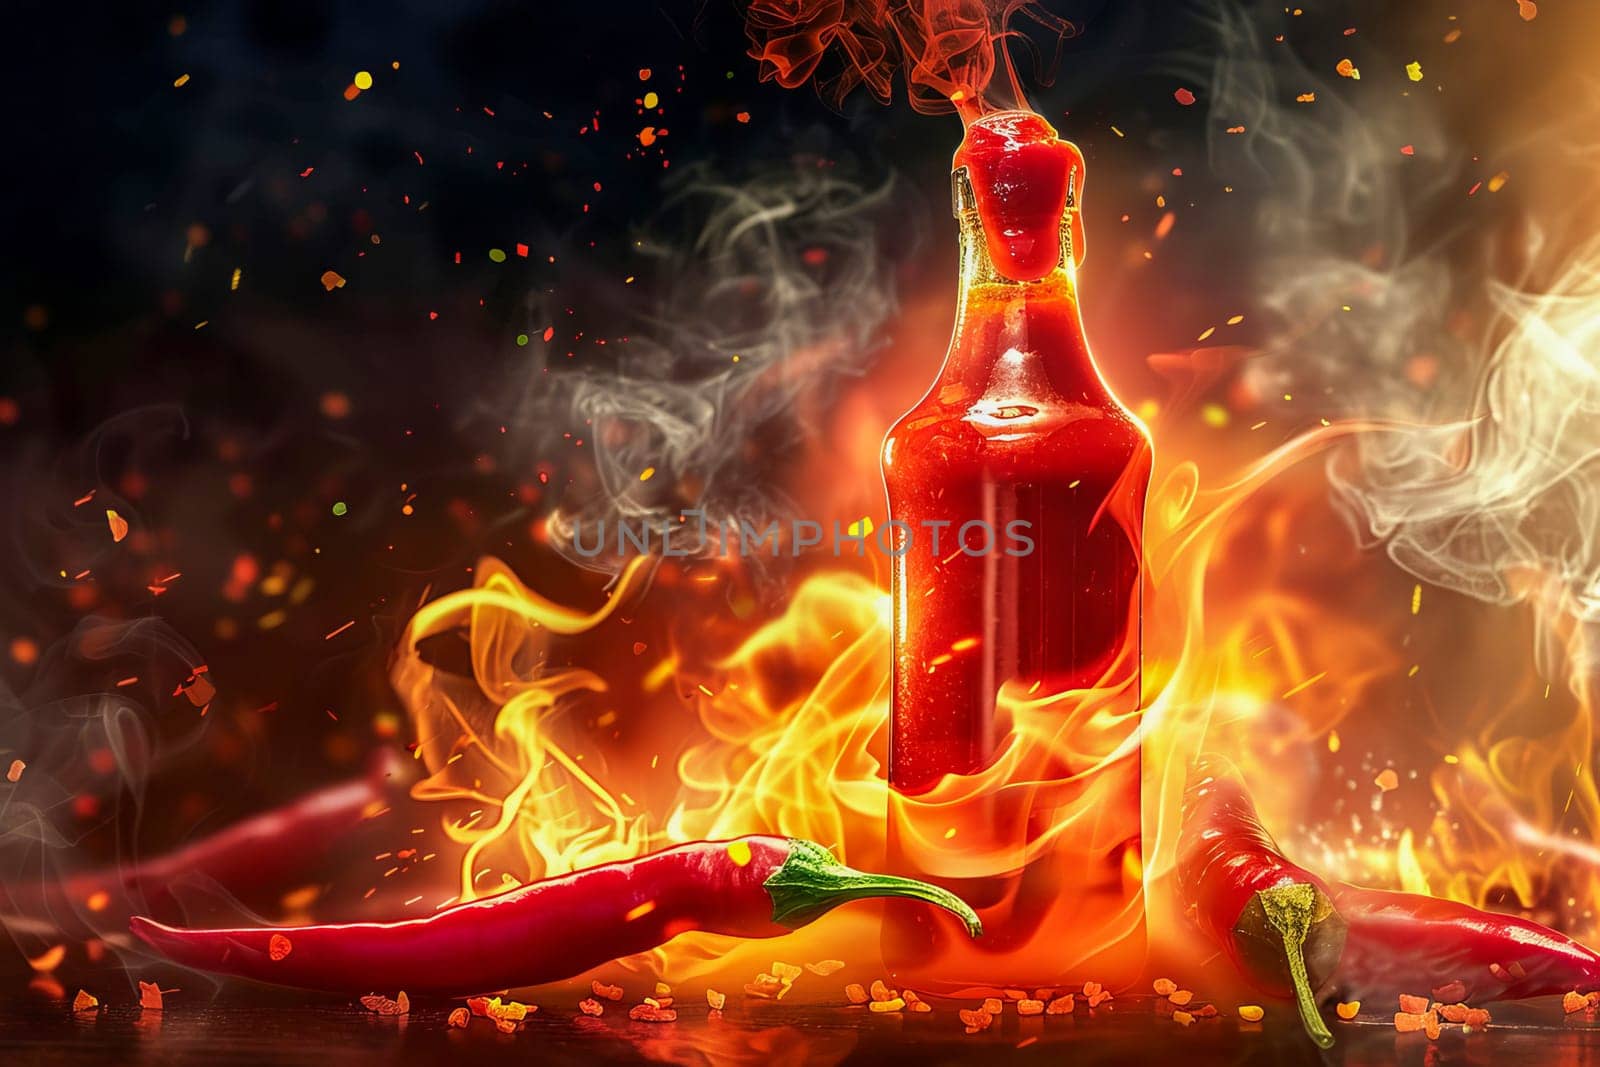 A bottle of hot sauce with flames and chili peppers around it. by OlgaGubskaya